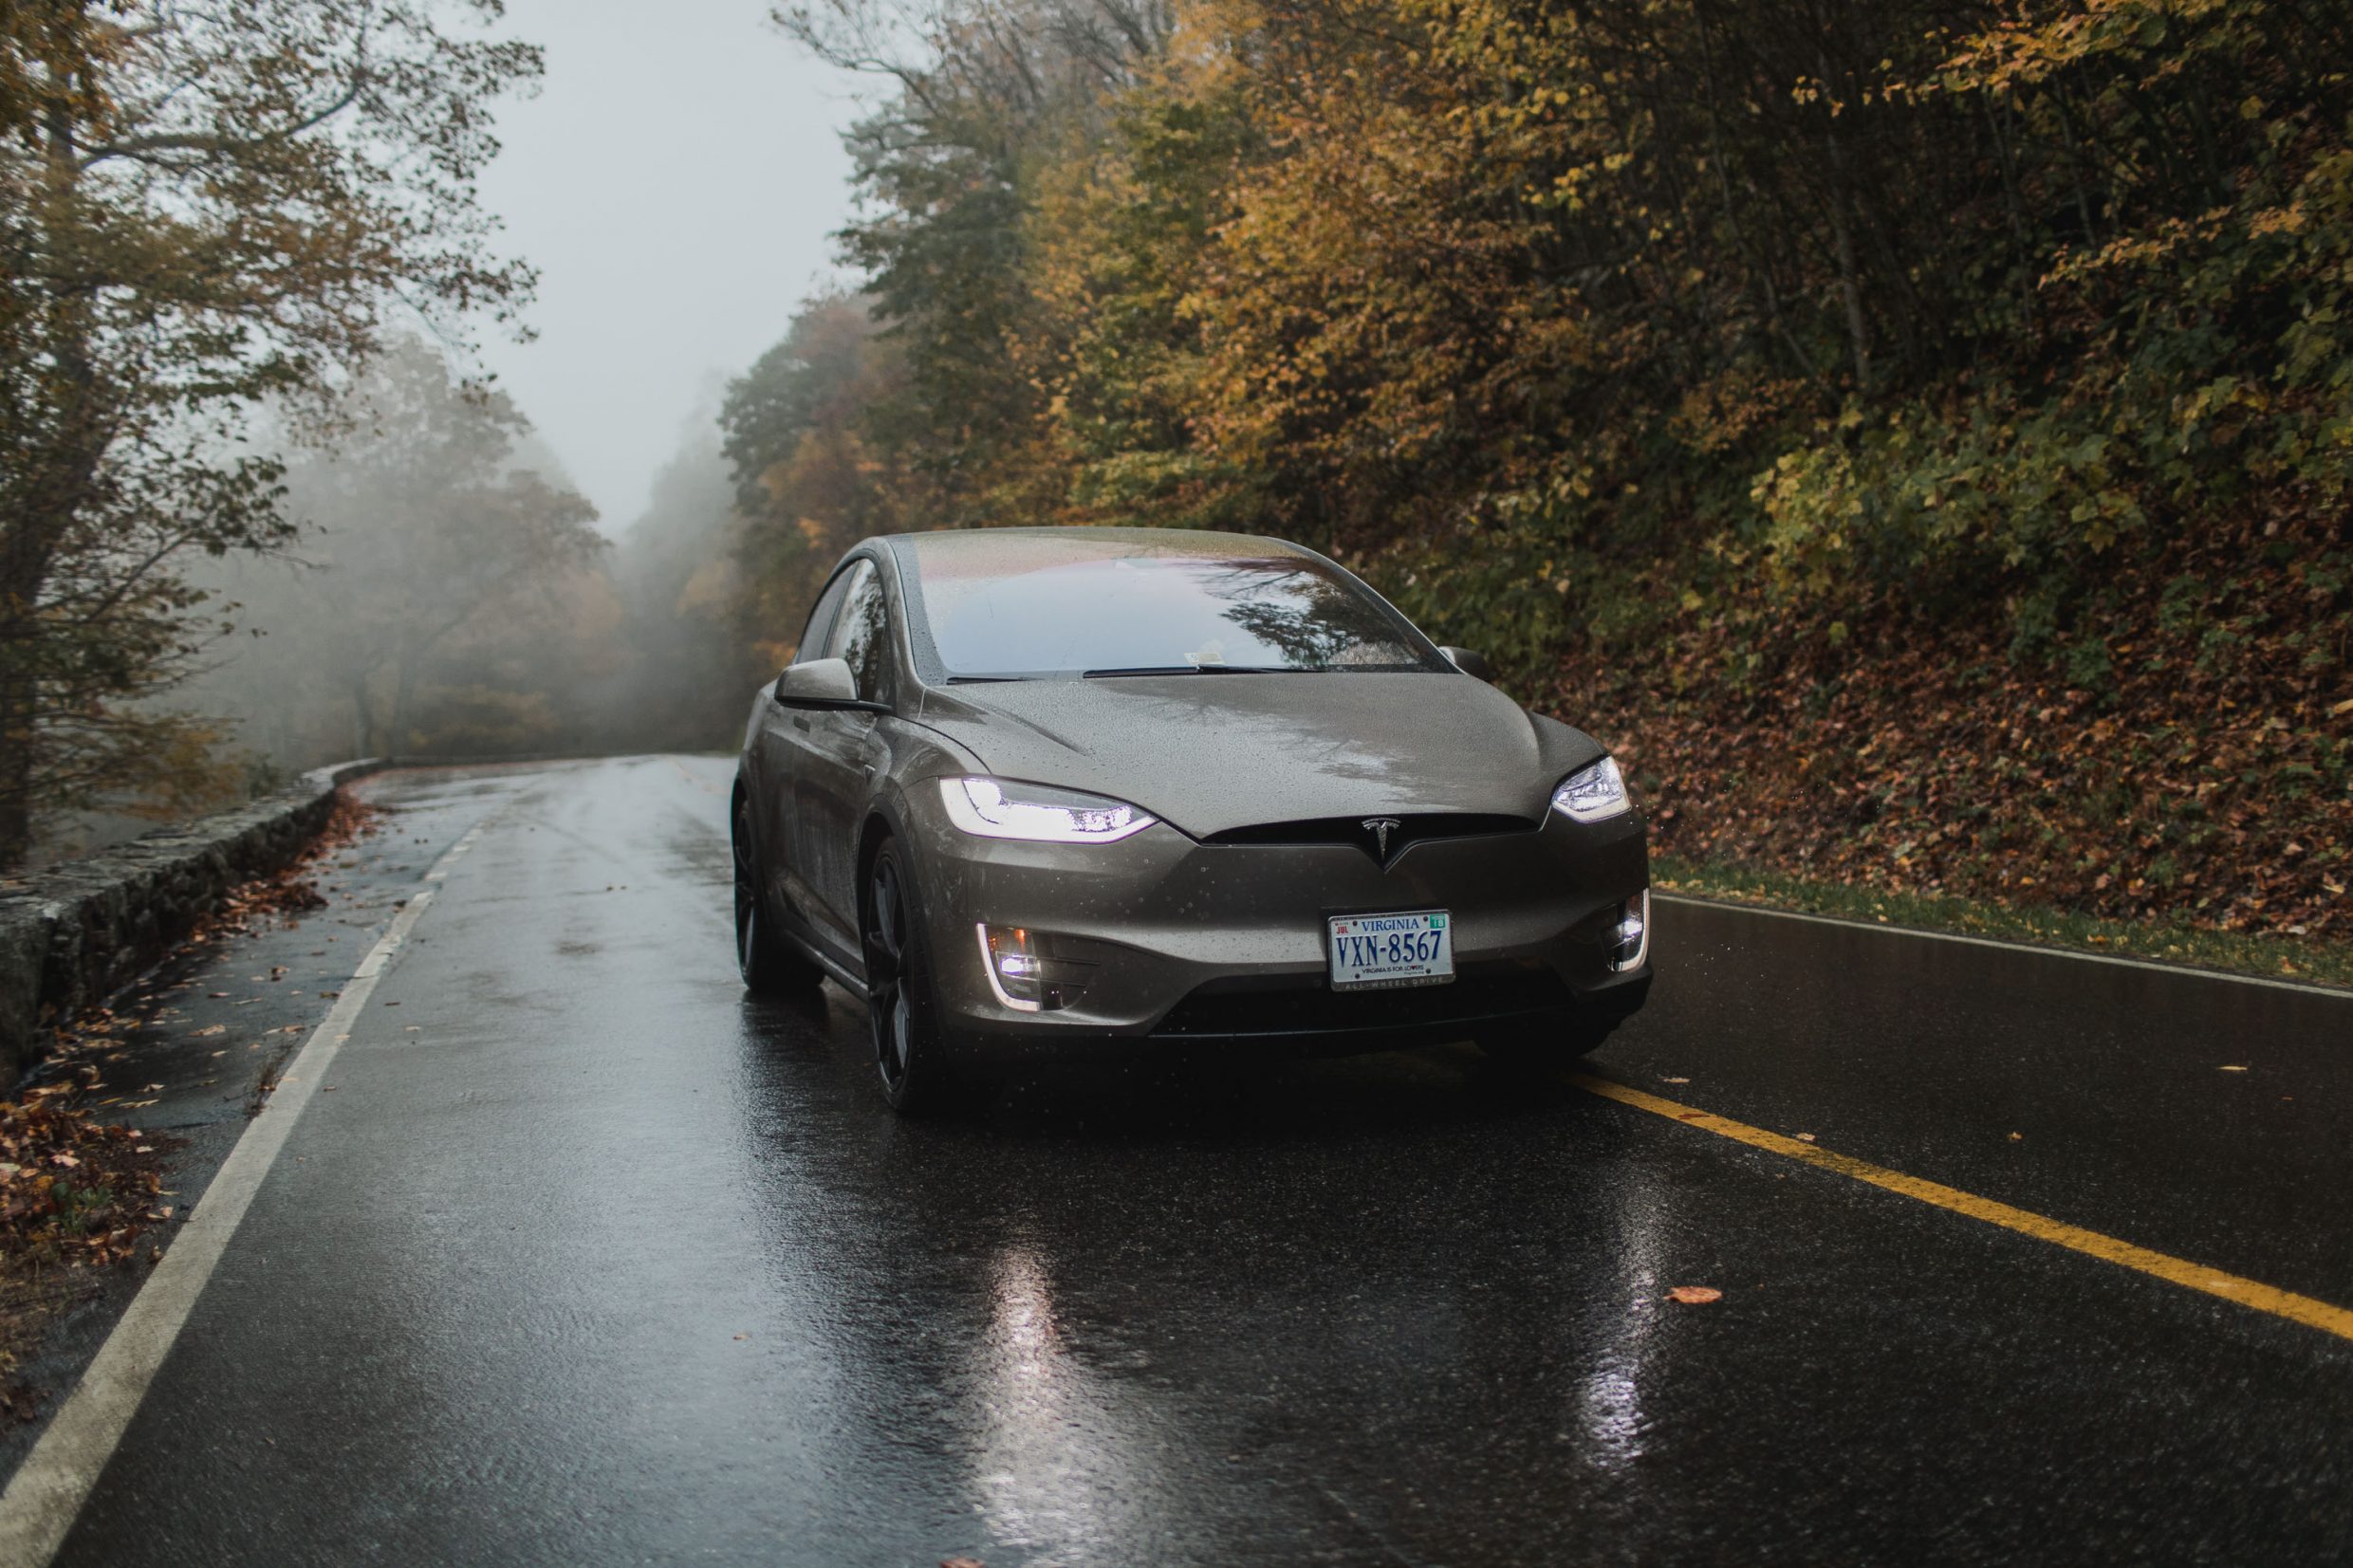 Driving a Tesla Model X into the Virginia Mountains of Shenandoah Valley for fall foliage